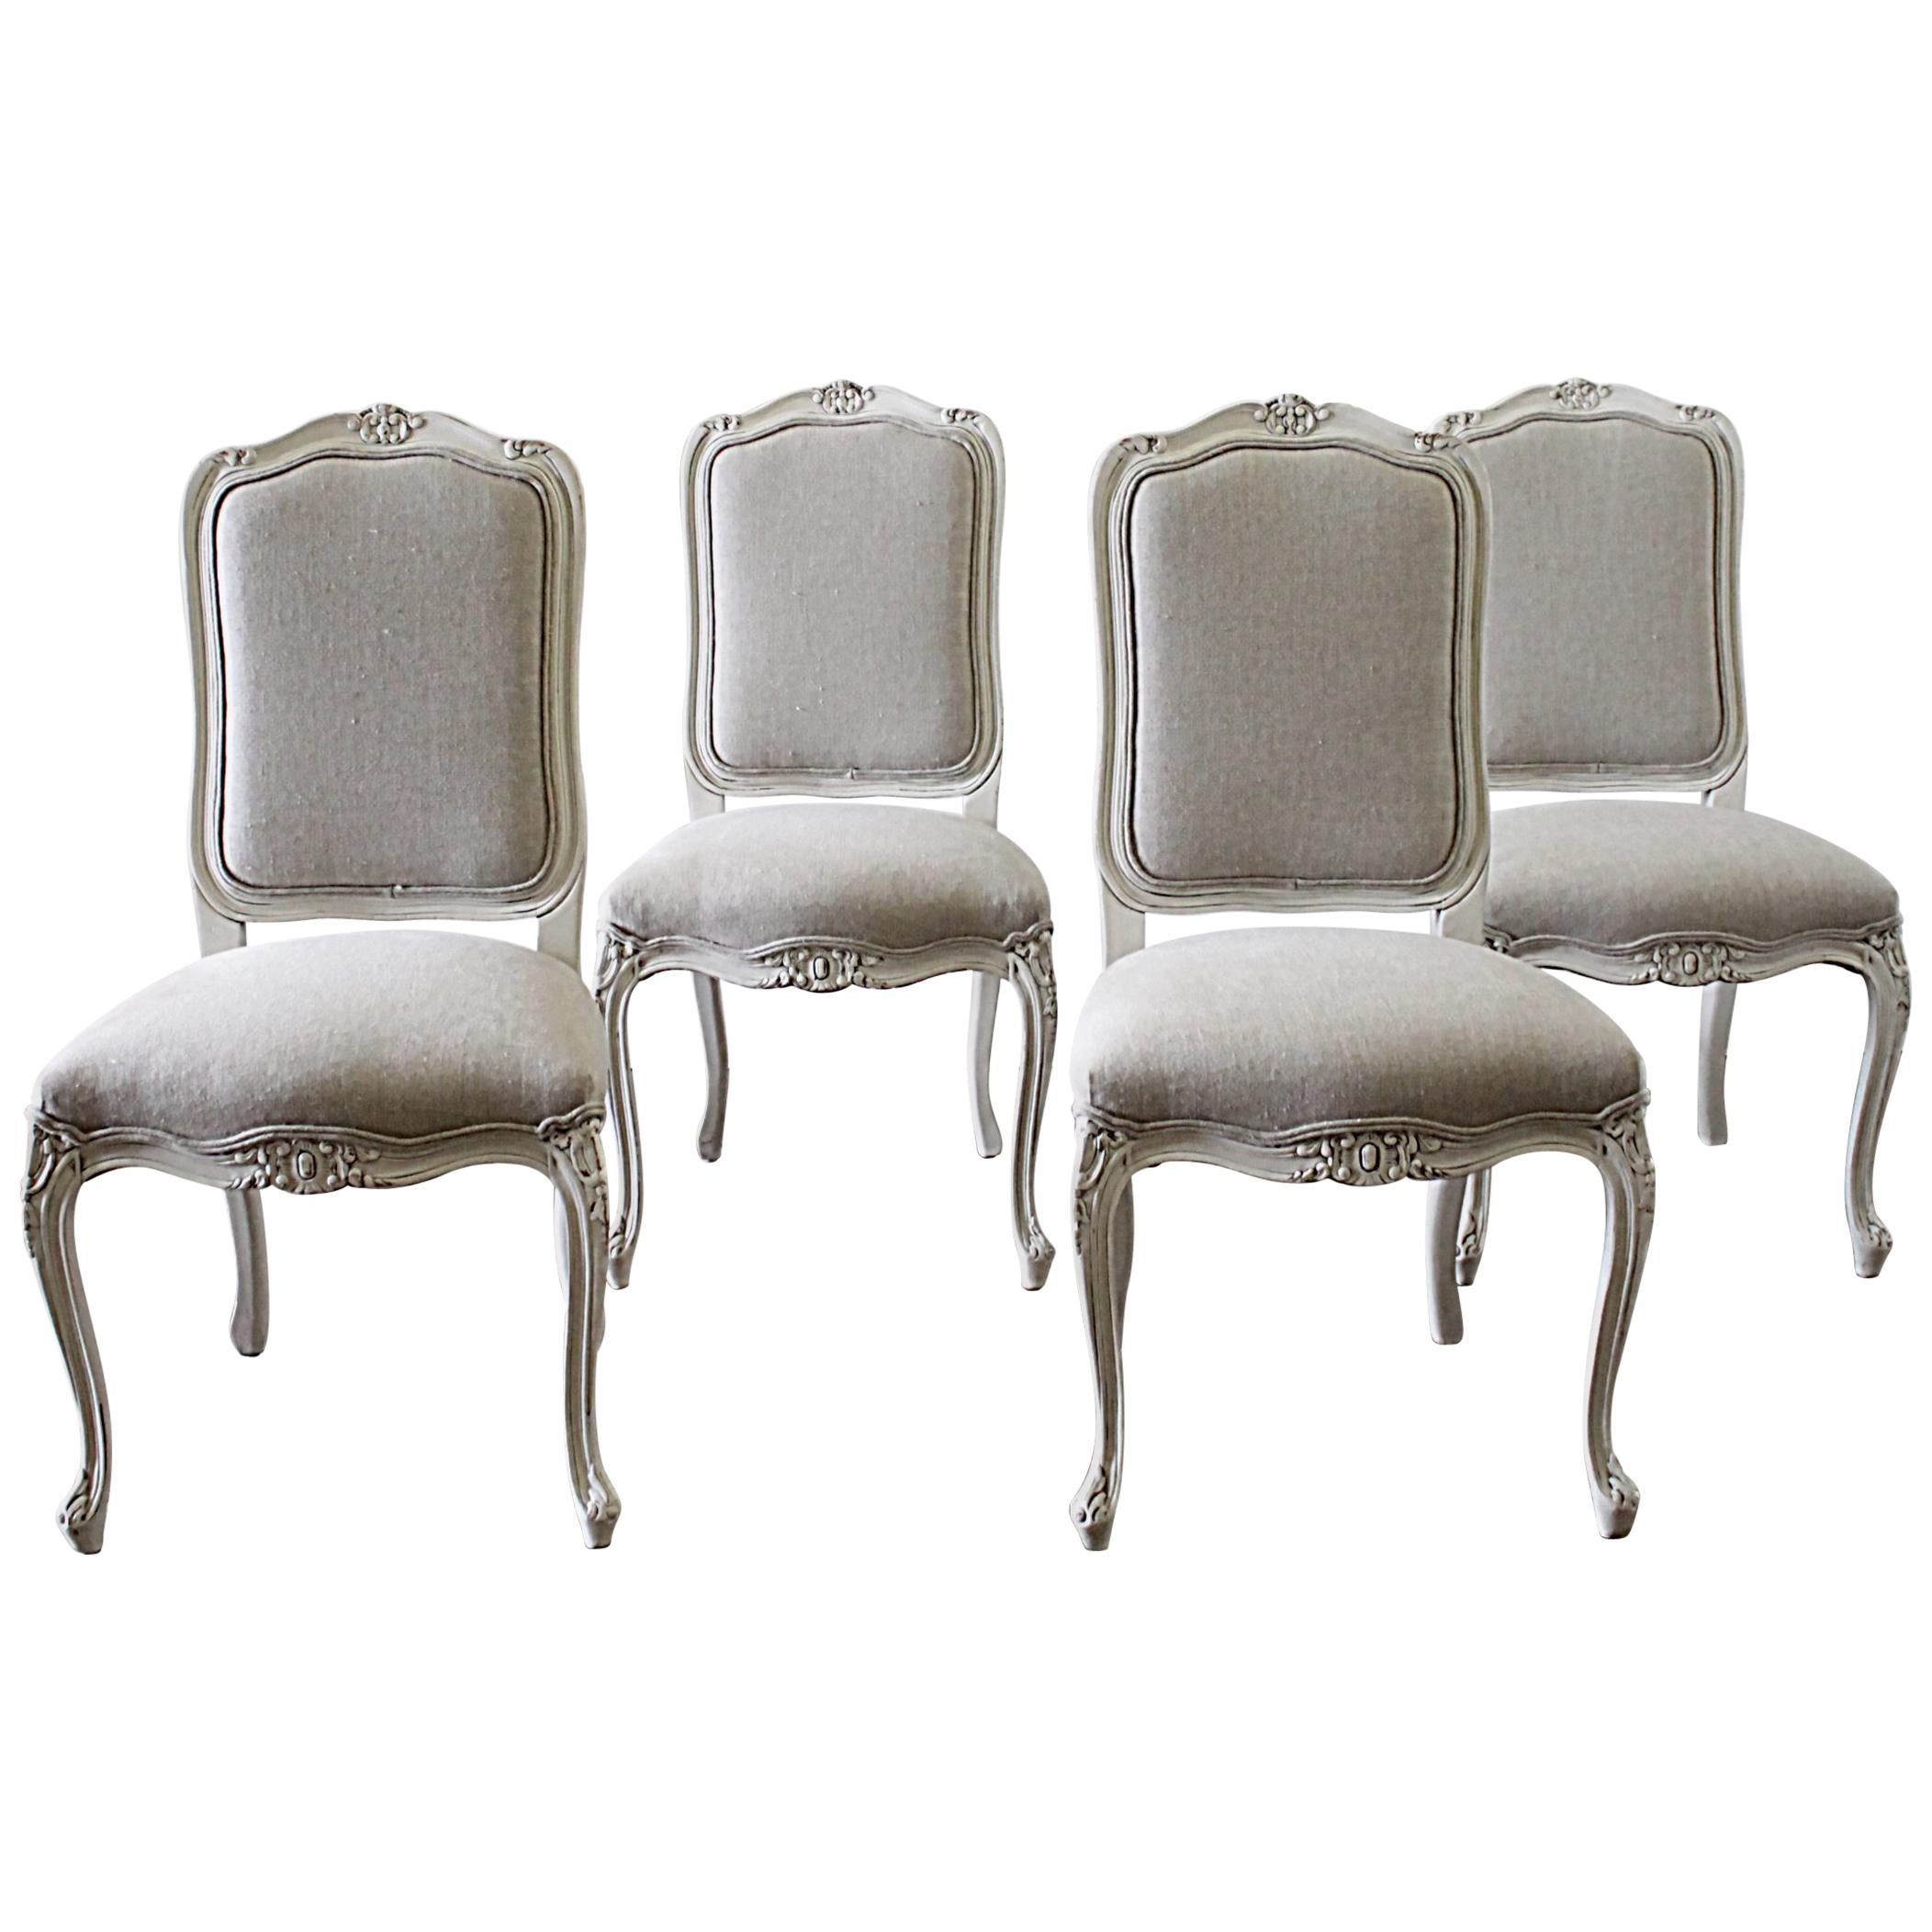 20th Century Set of 6 French Country Painted and Linen Upholstered Dining Chairs